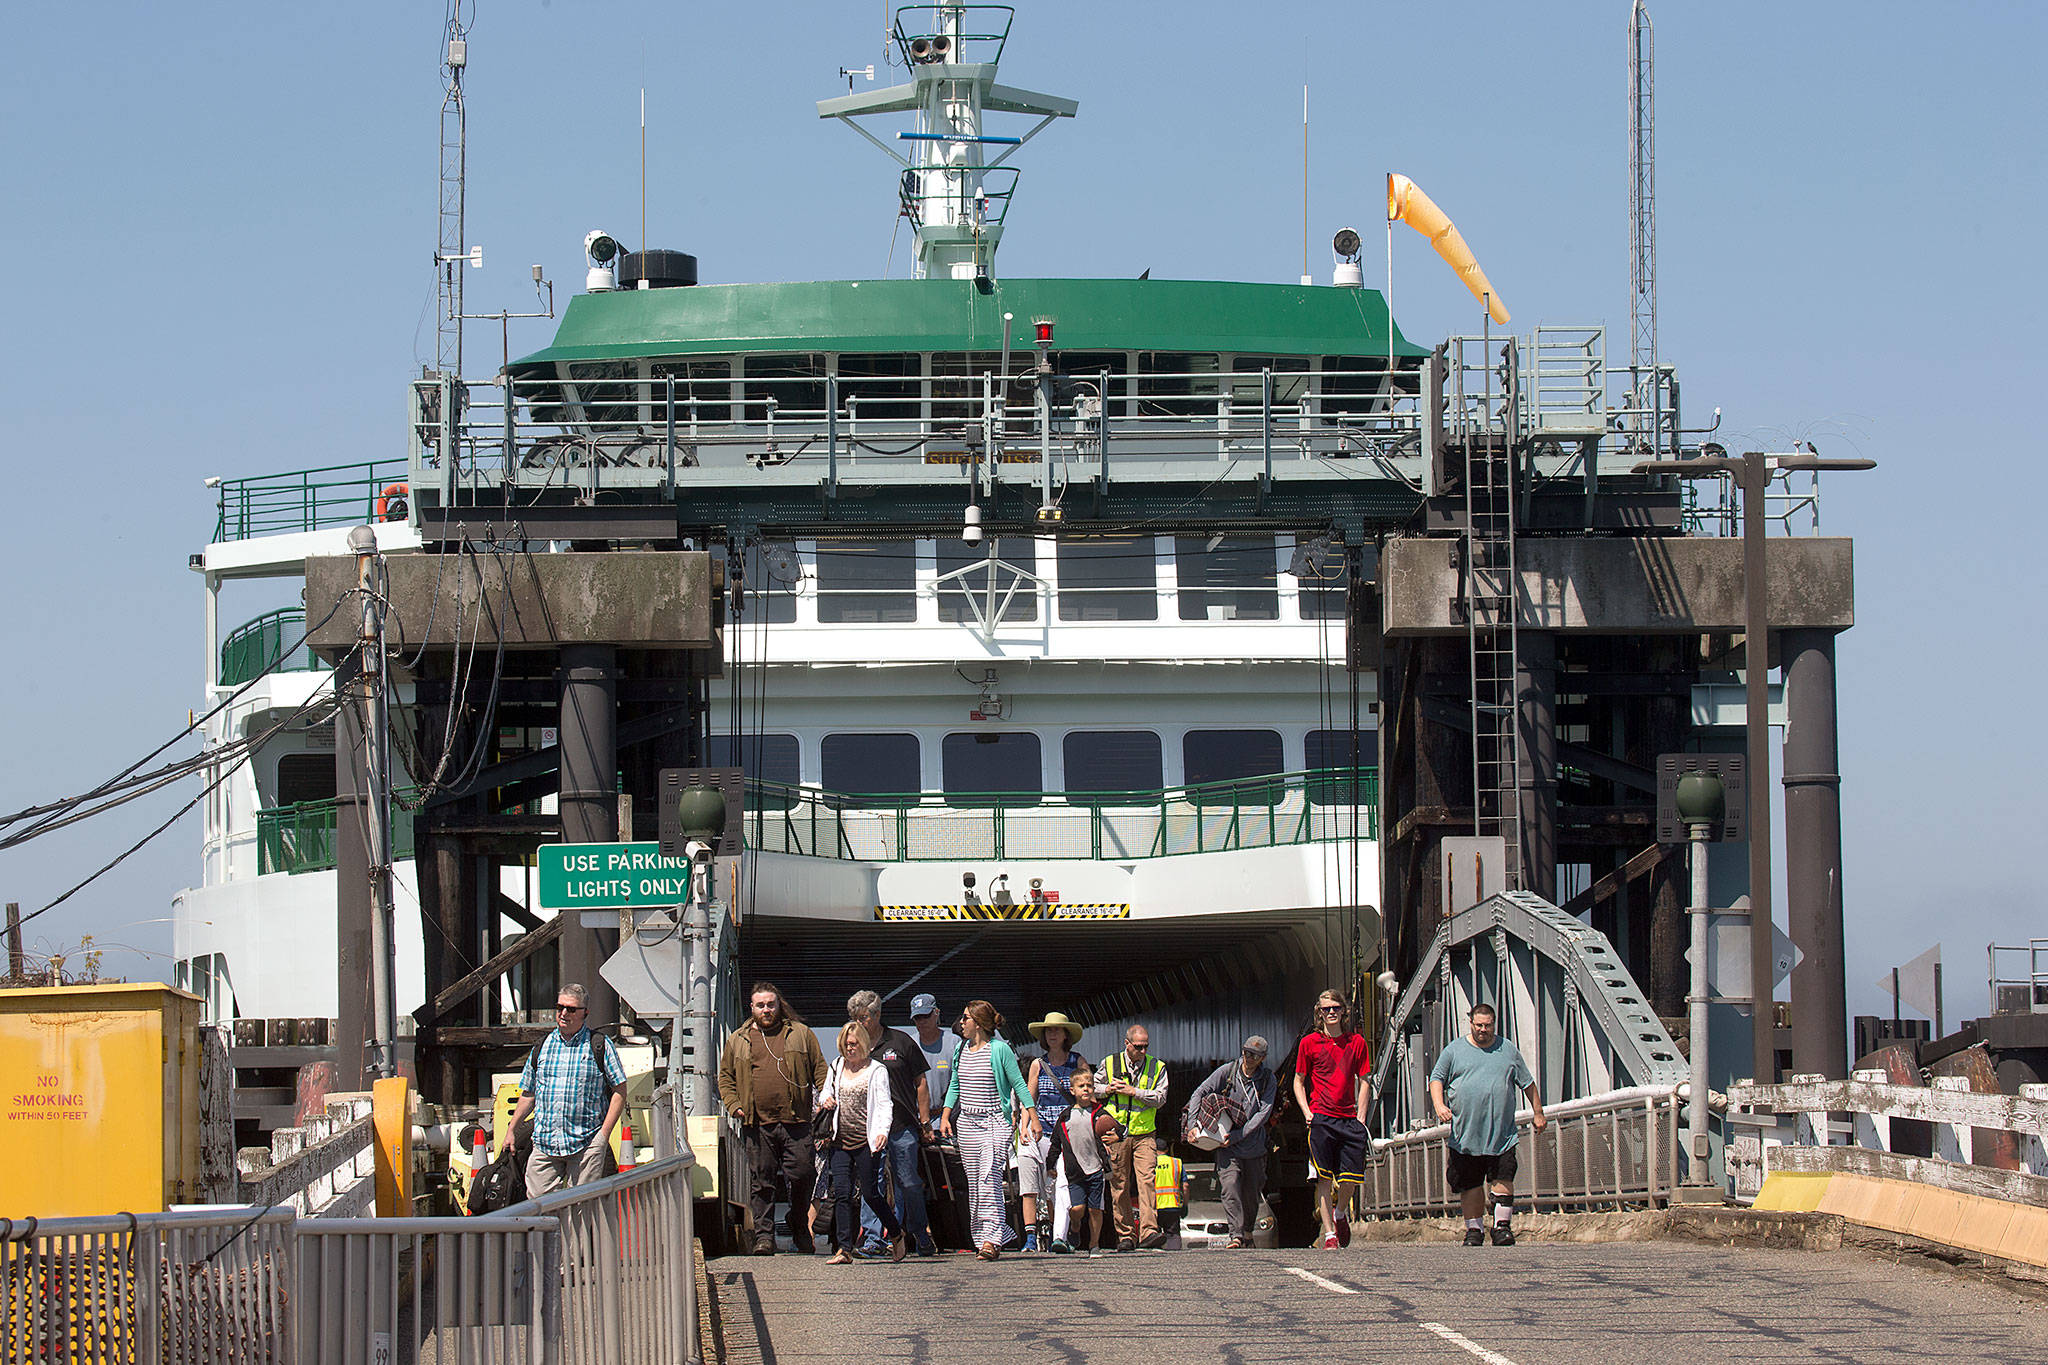 Walk-on passengers disembark from the ferry Suquamish at the Mukilteo ferry dock on Tuesday. The Washington State Transportation Commissioners has approved all of the proposed ferry rate increases for passengers and cars. (Andy Bronson / The Herald )